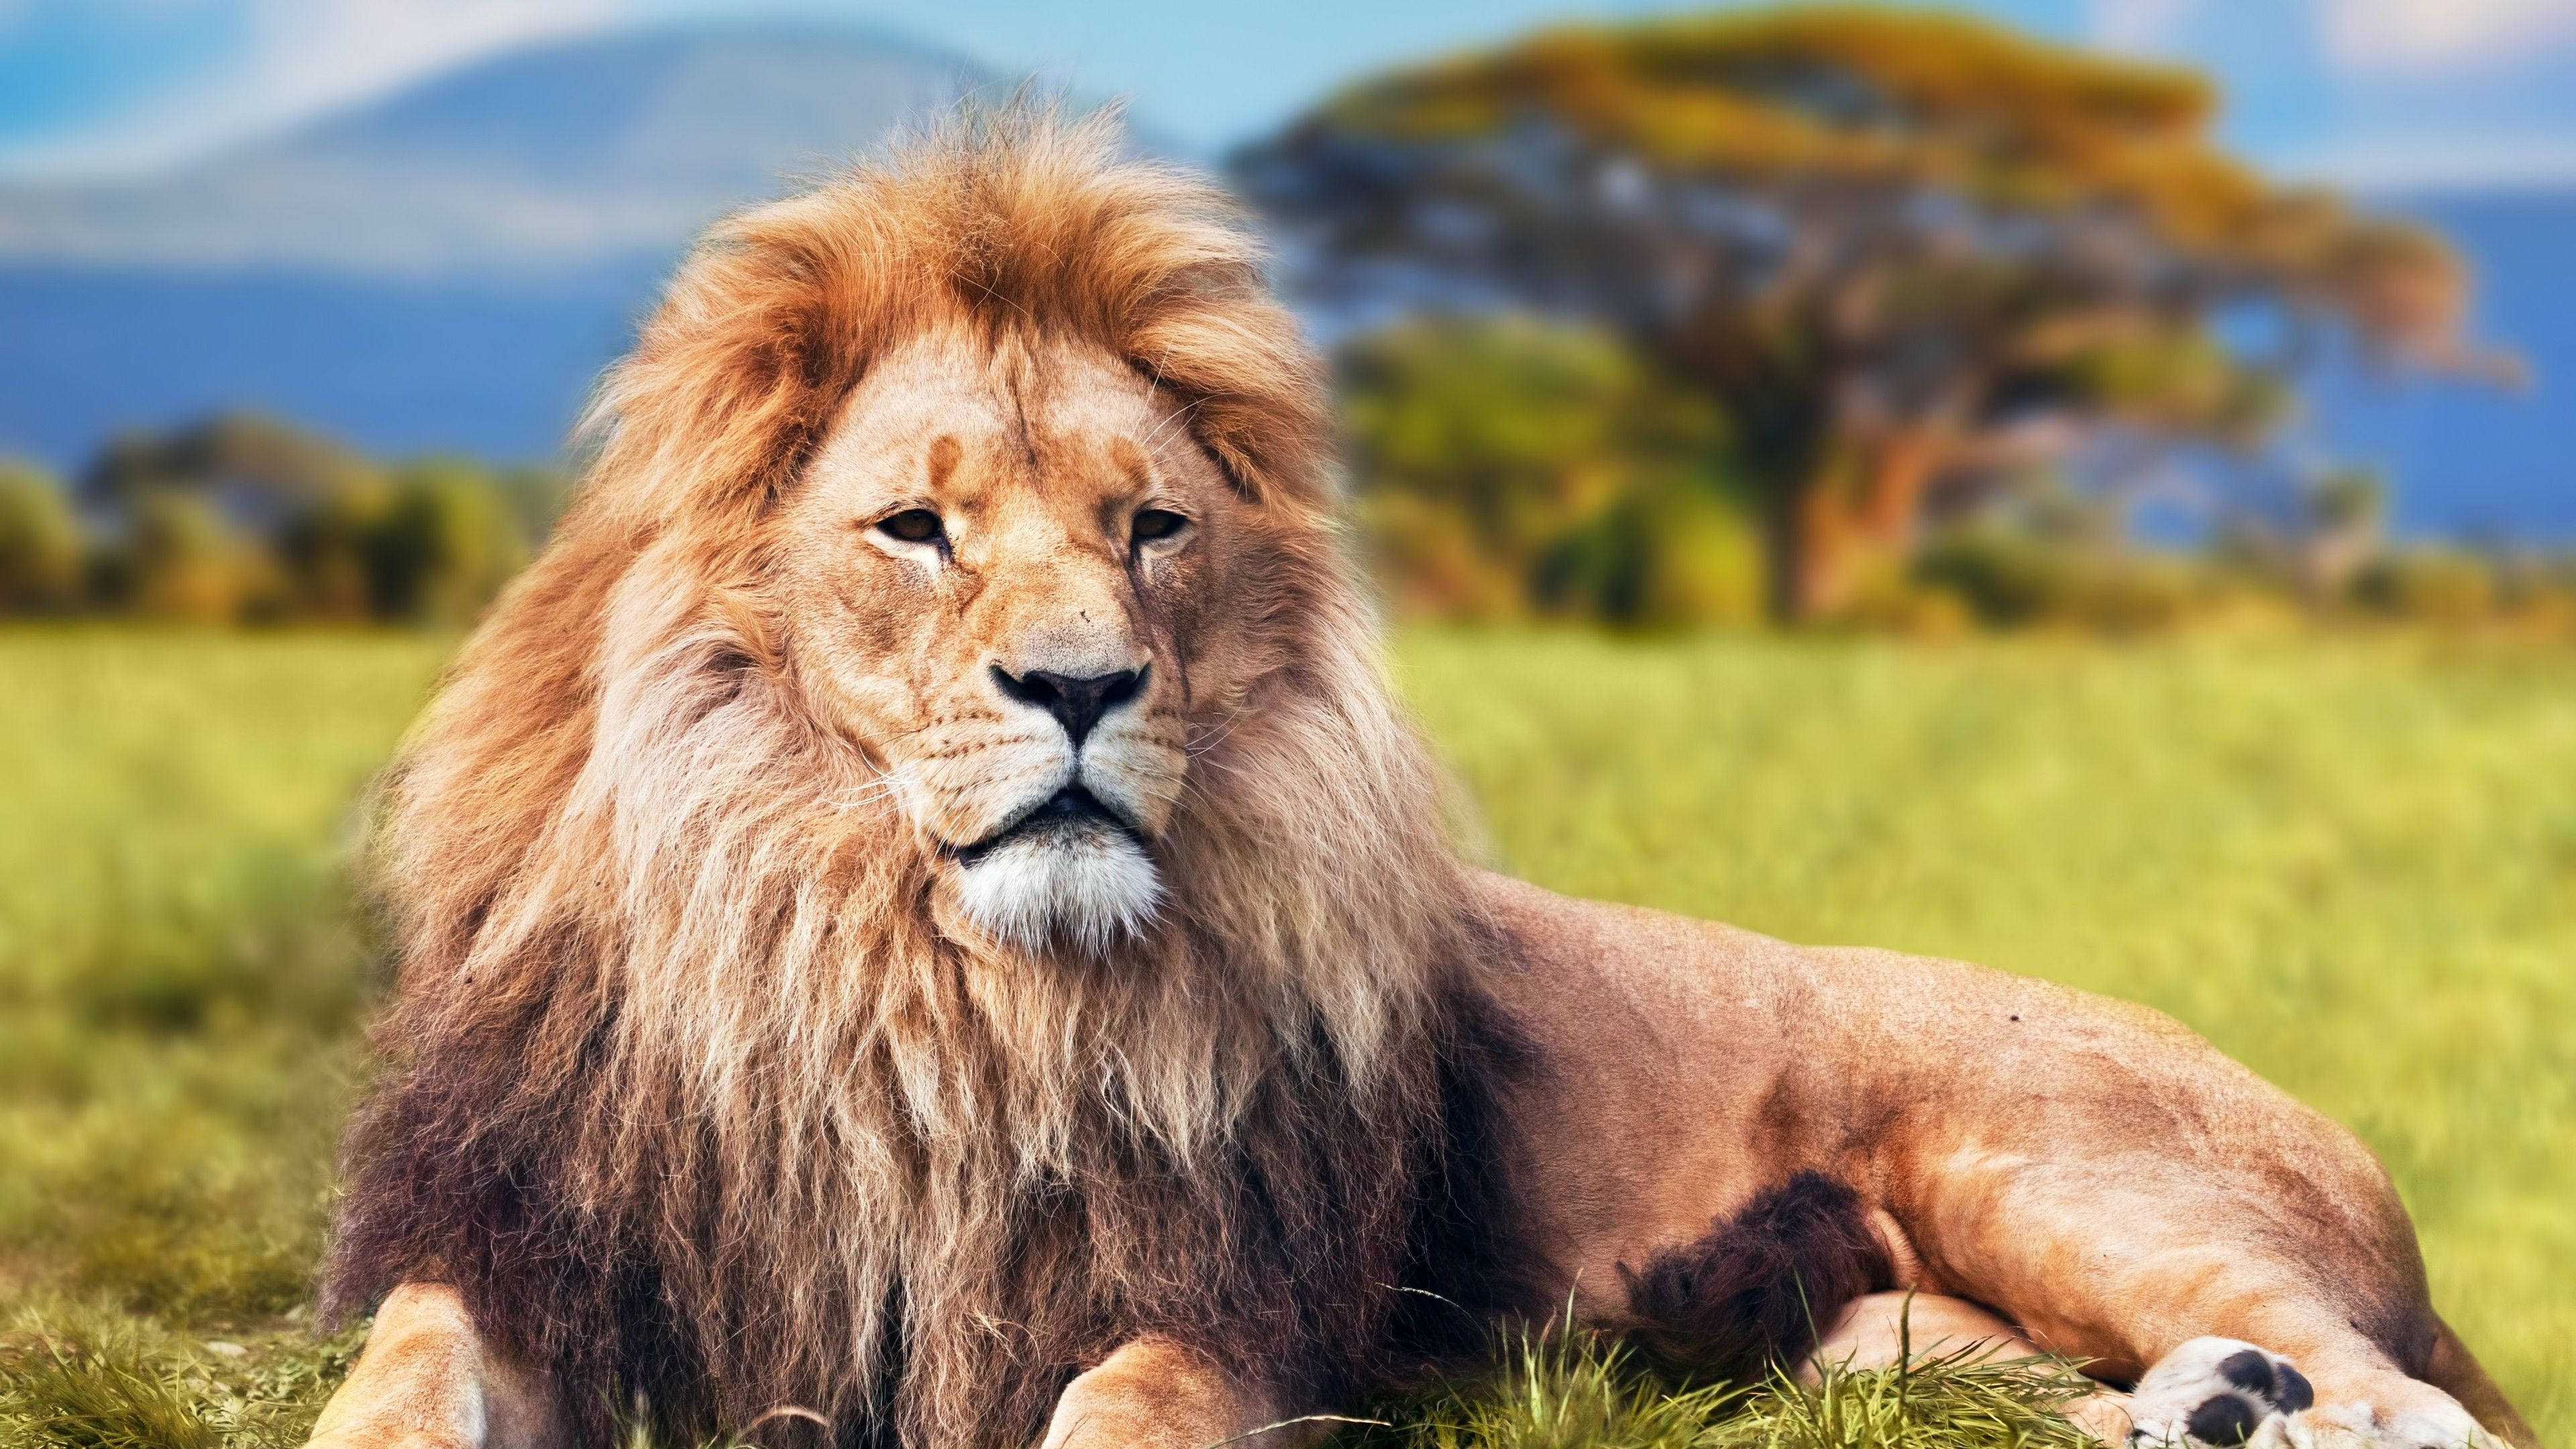 Lion 4k, HD Animals, 4k Wallpapers, Image, Backgrounds, Photos